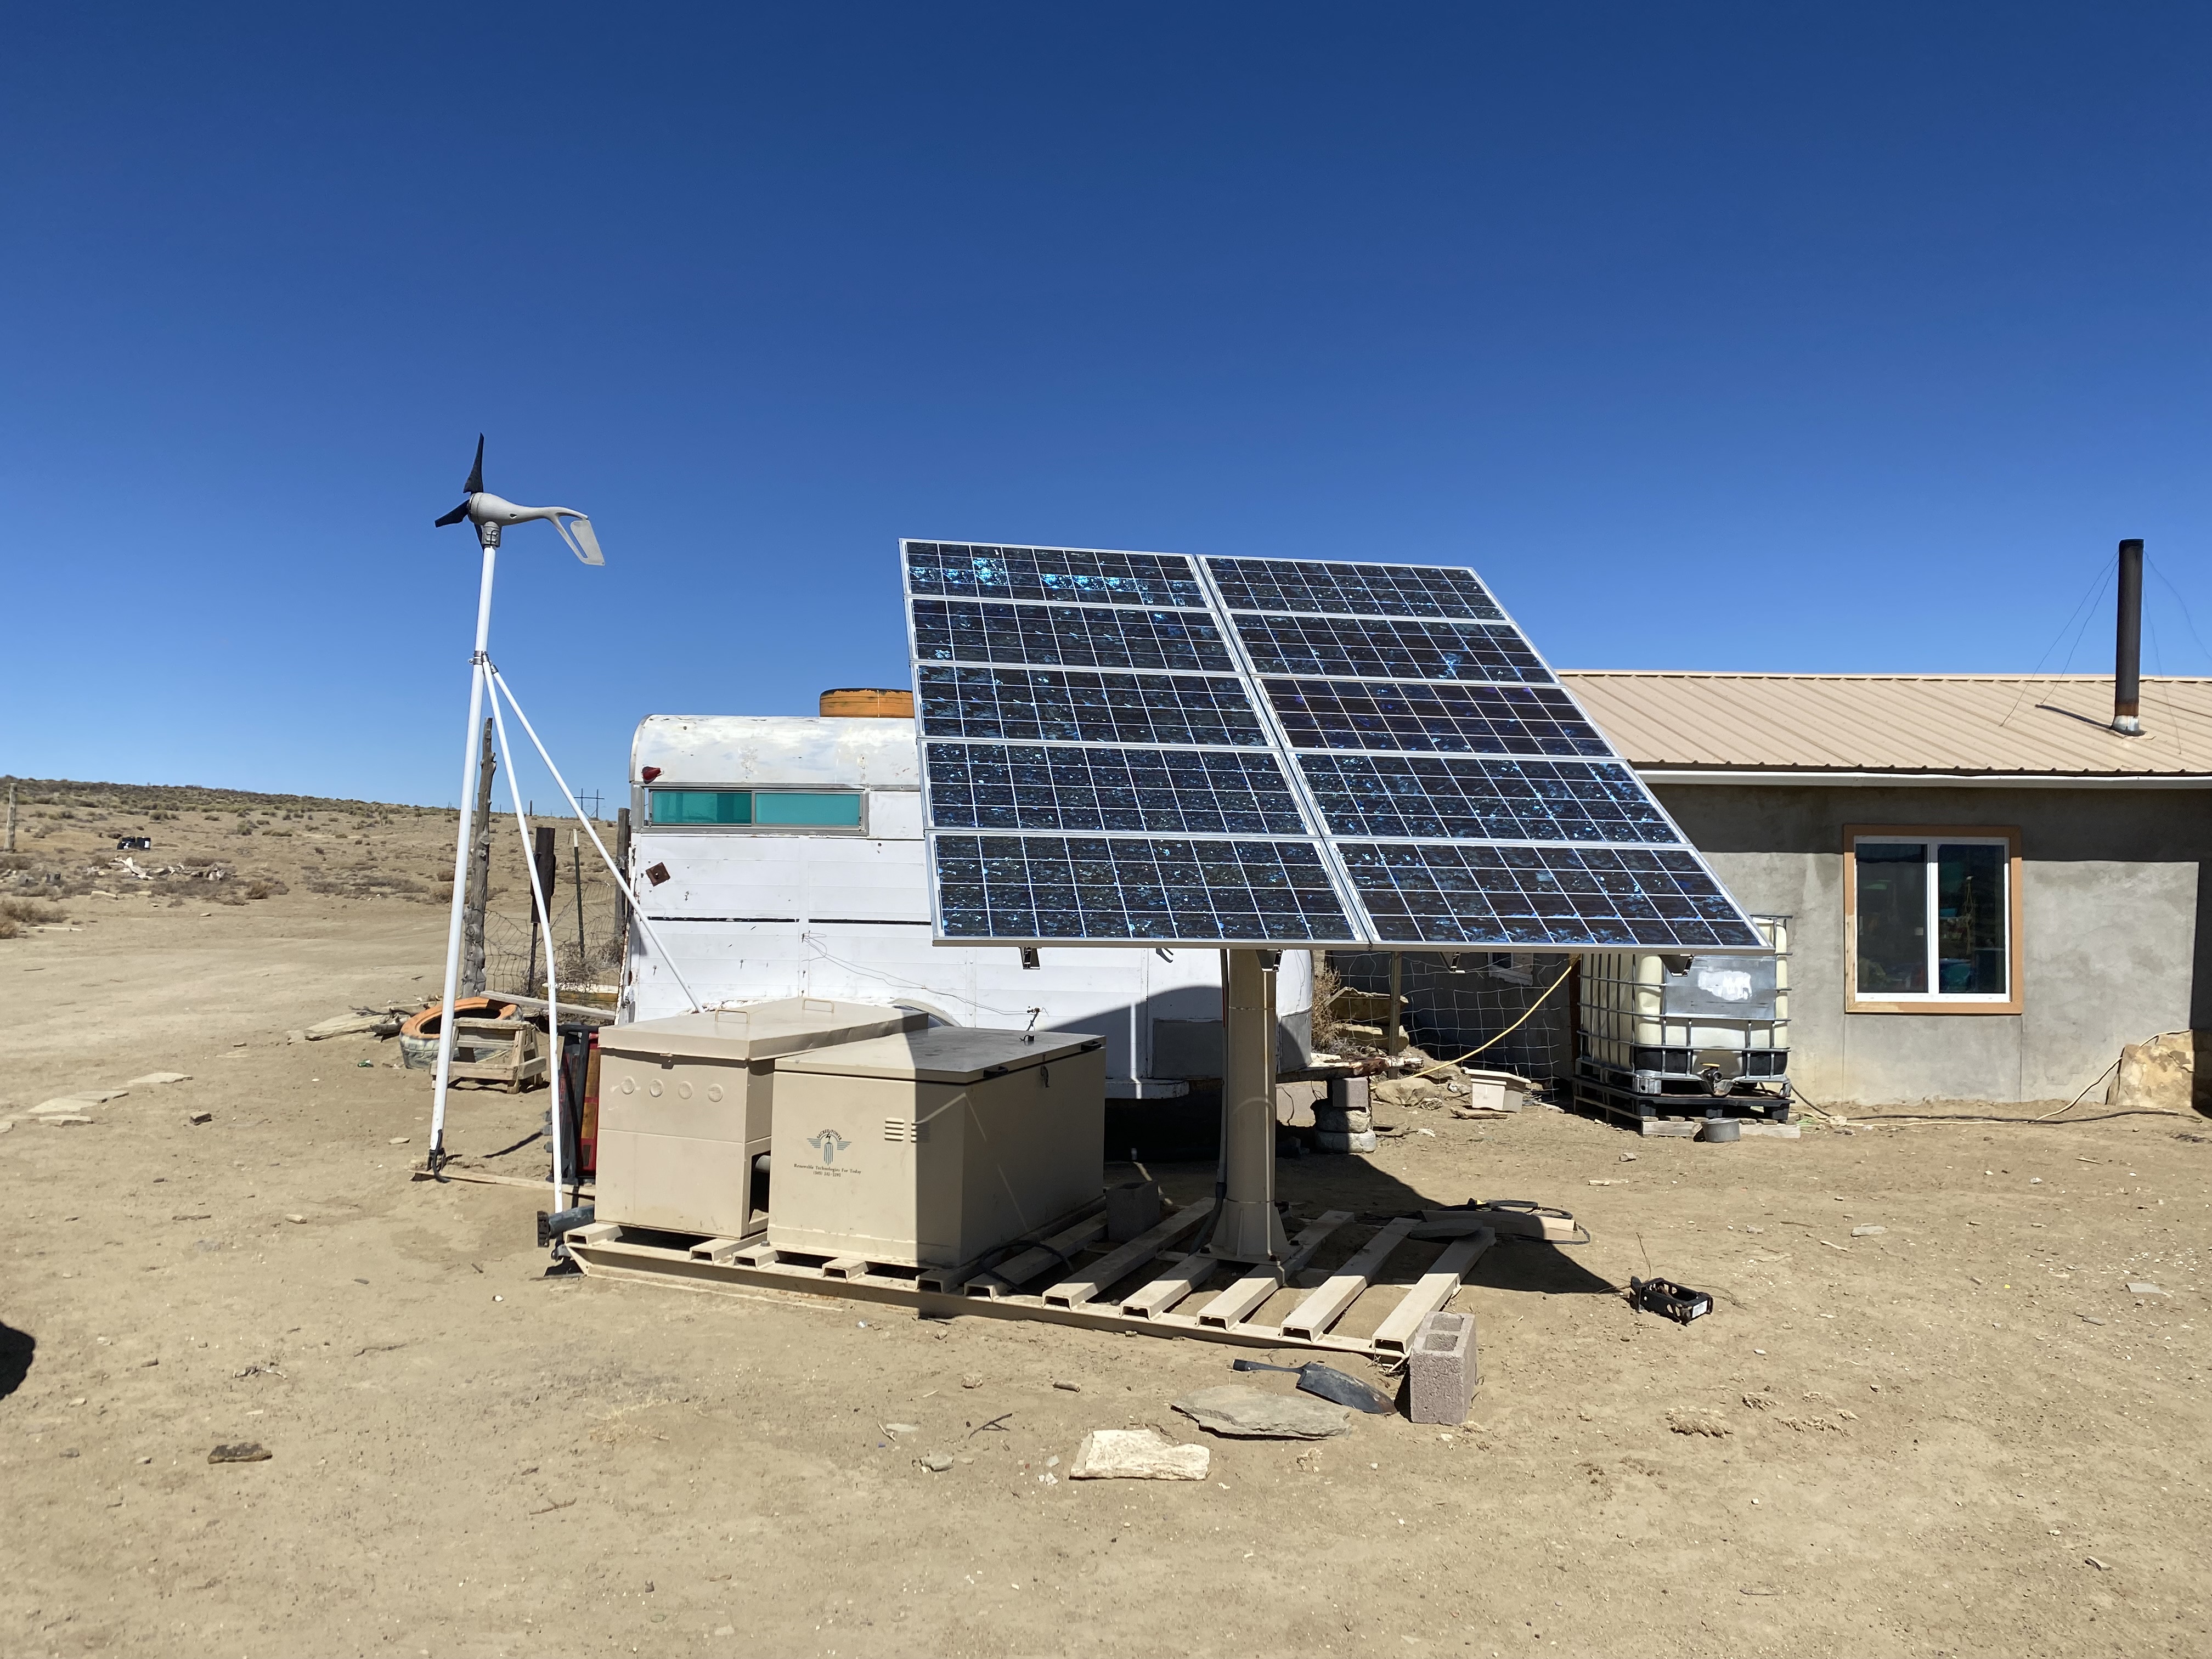 Off-grid PV system in front of a modest home